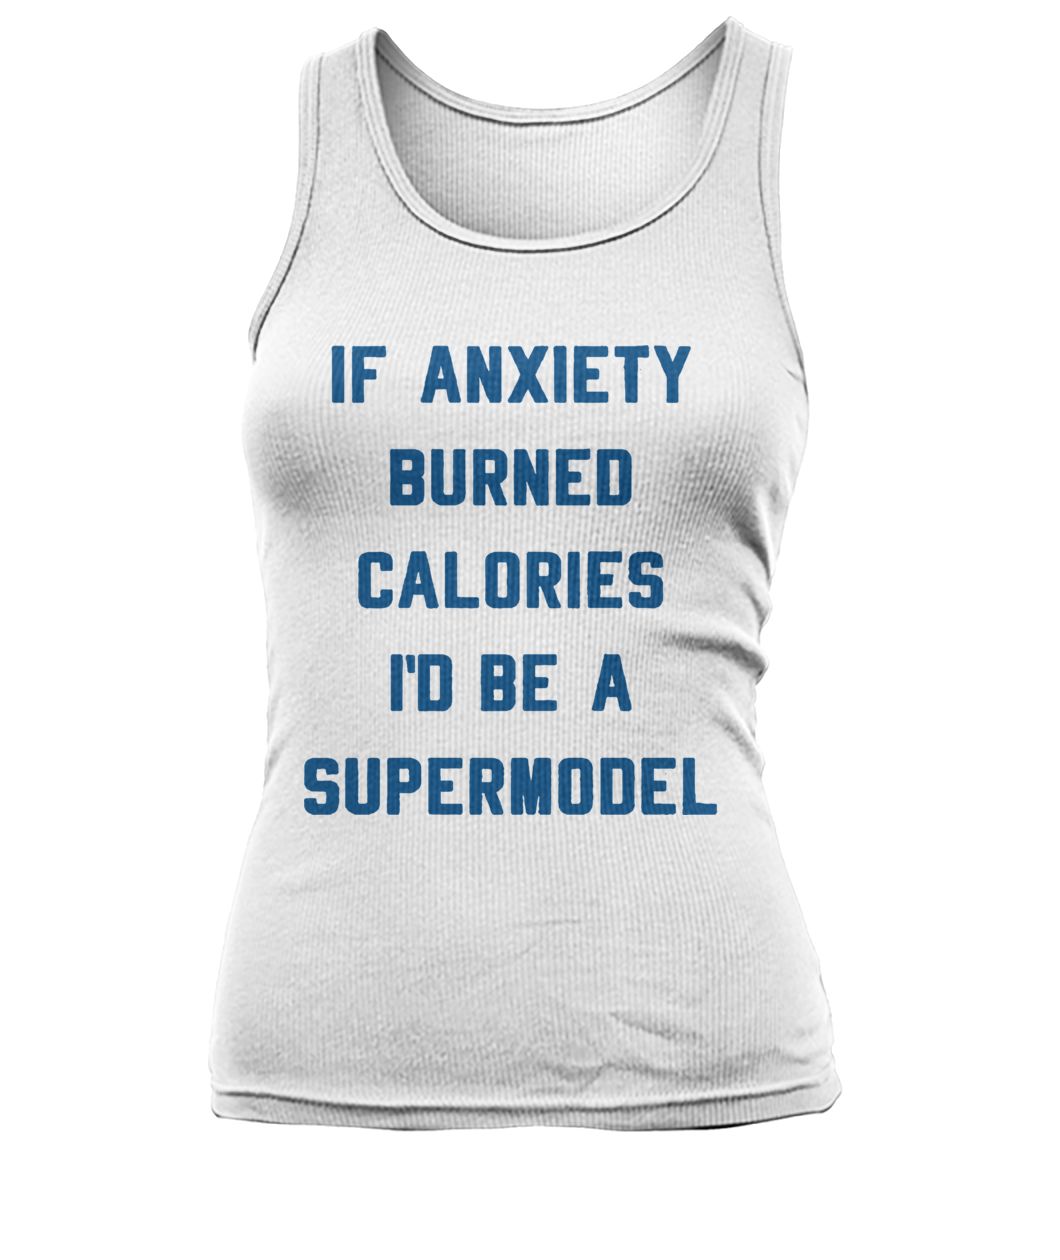 If anxiety burned calories I'd be a supermodel women's tank top